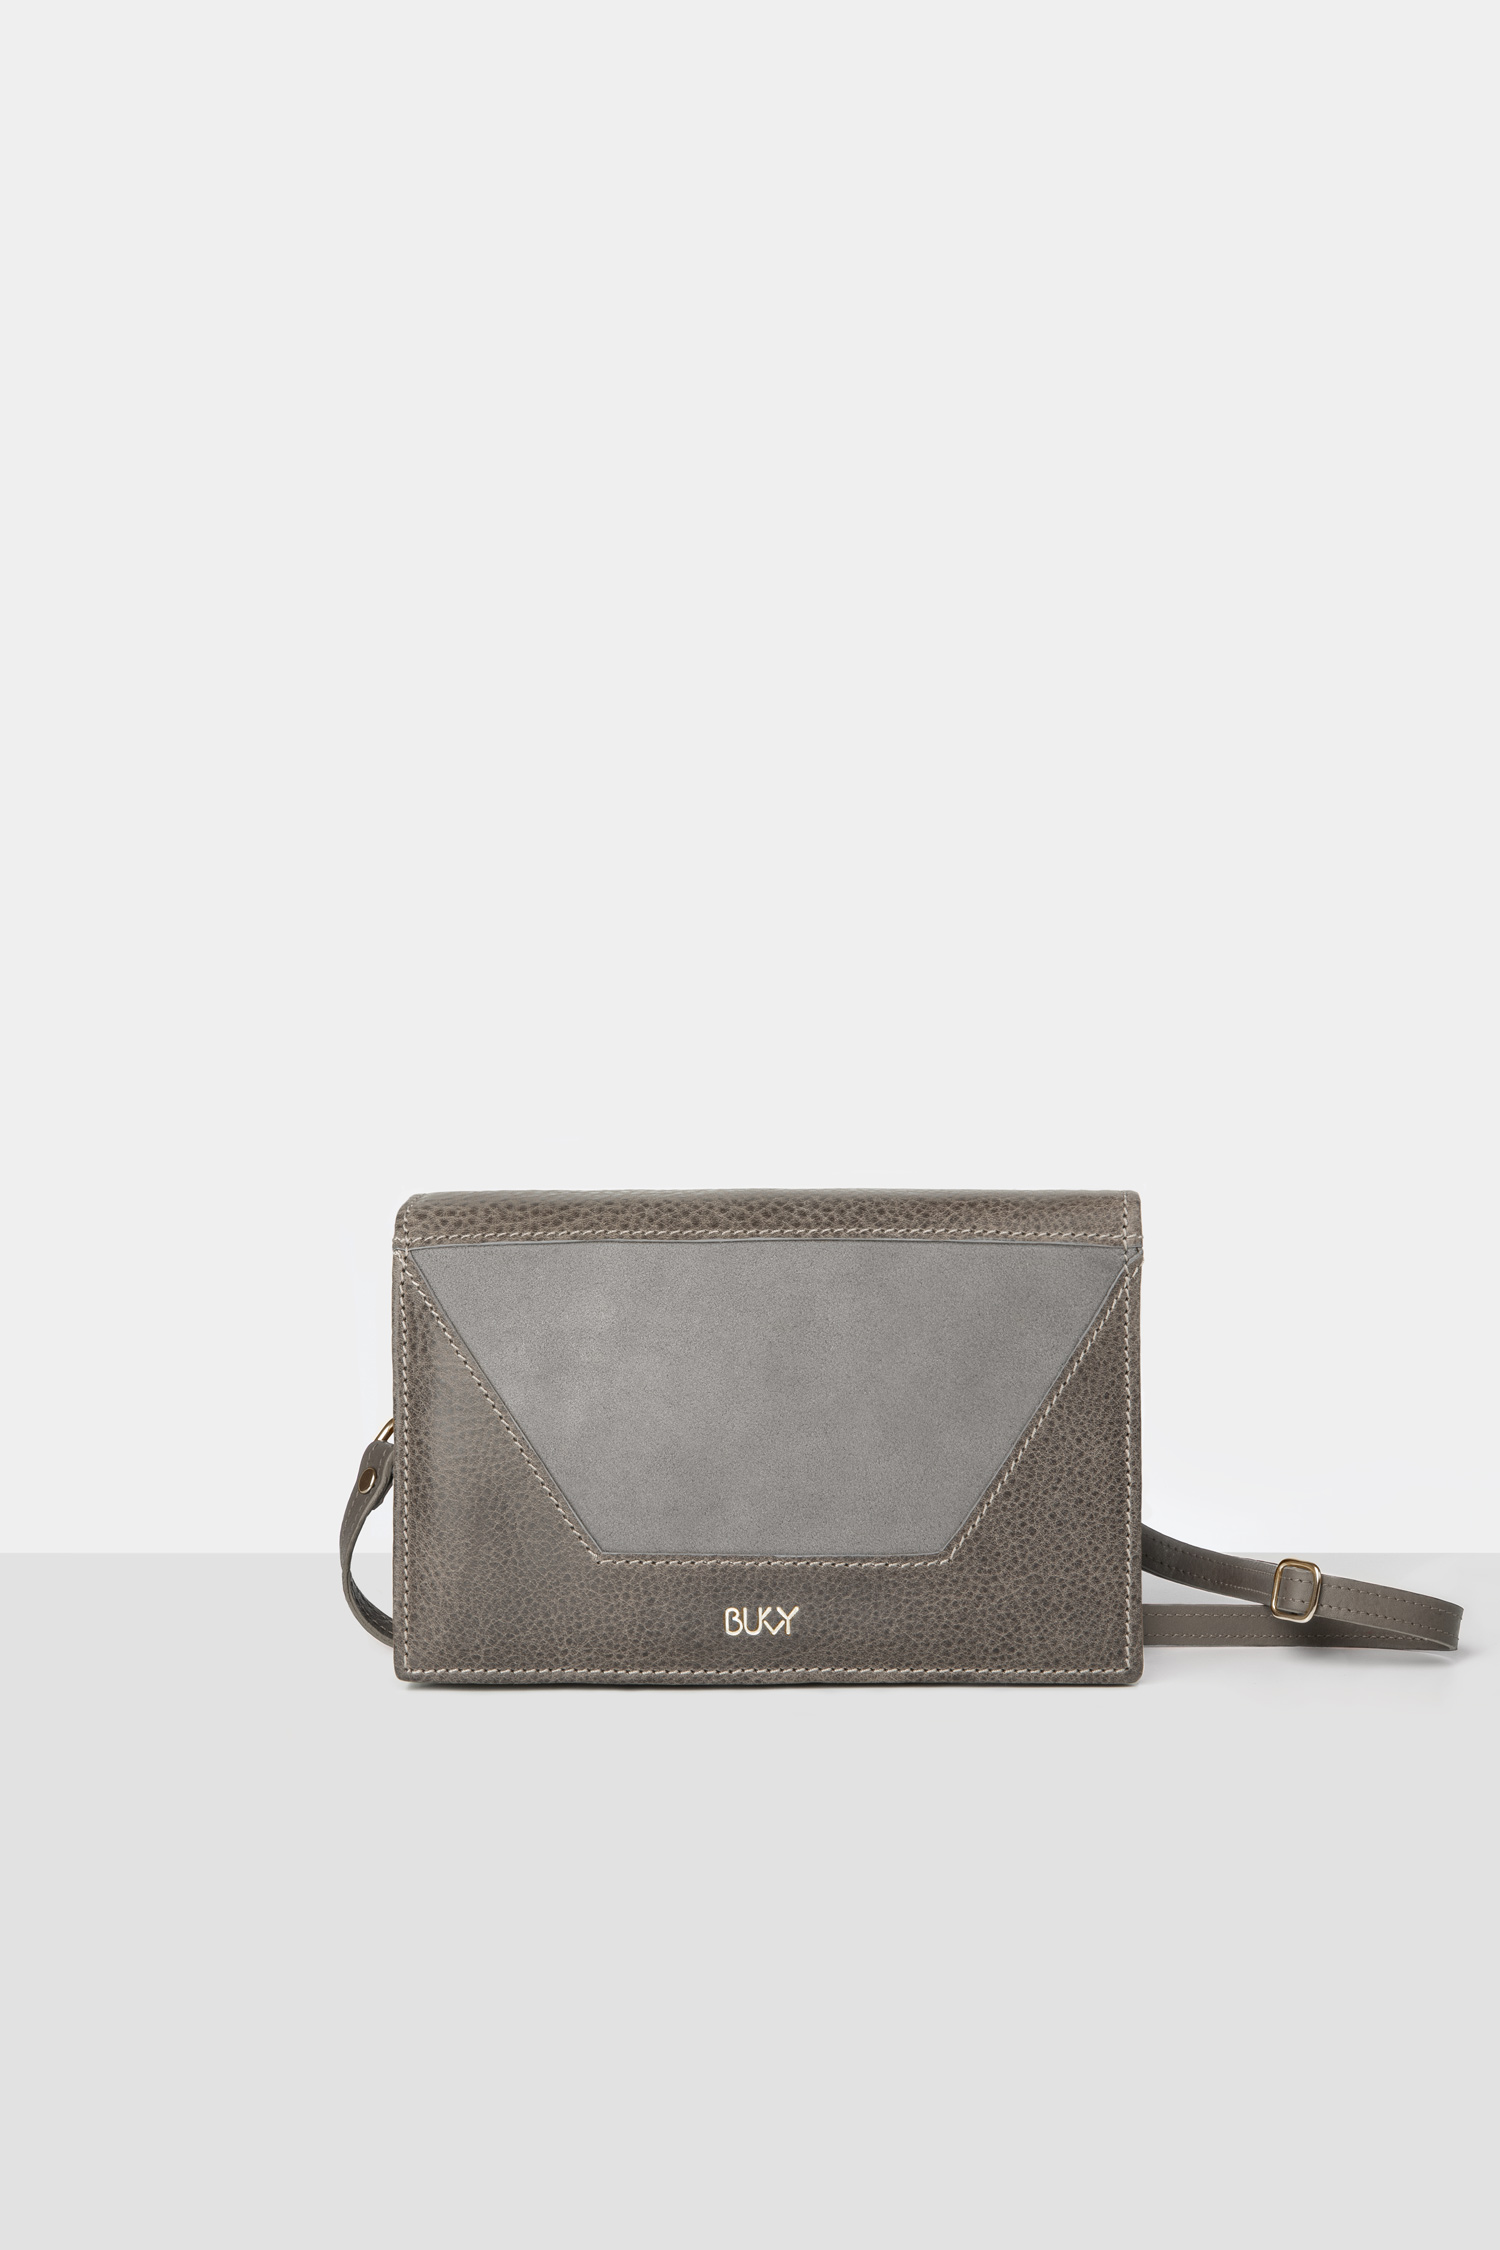 Bukvy Shikibu Wallet Bag - Grey Marble with Silver Fittings